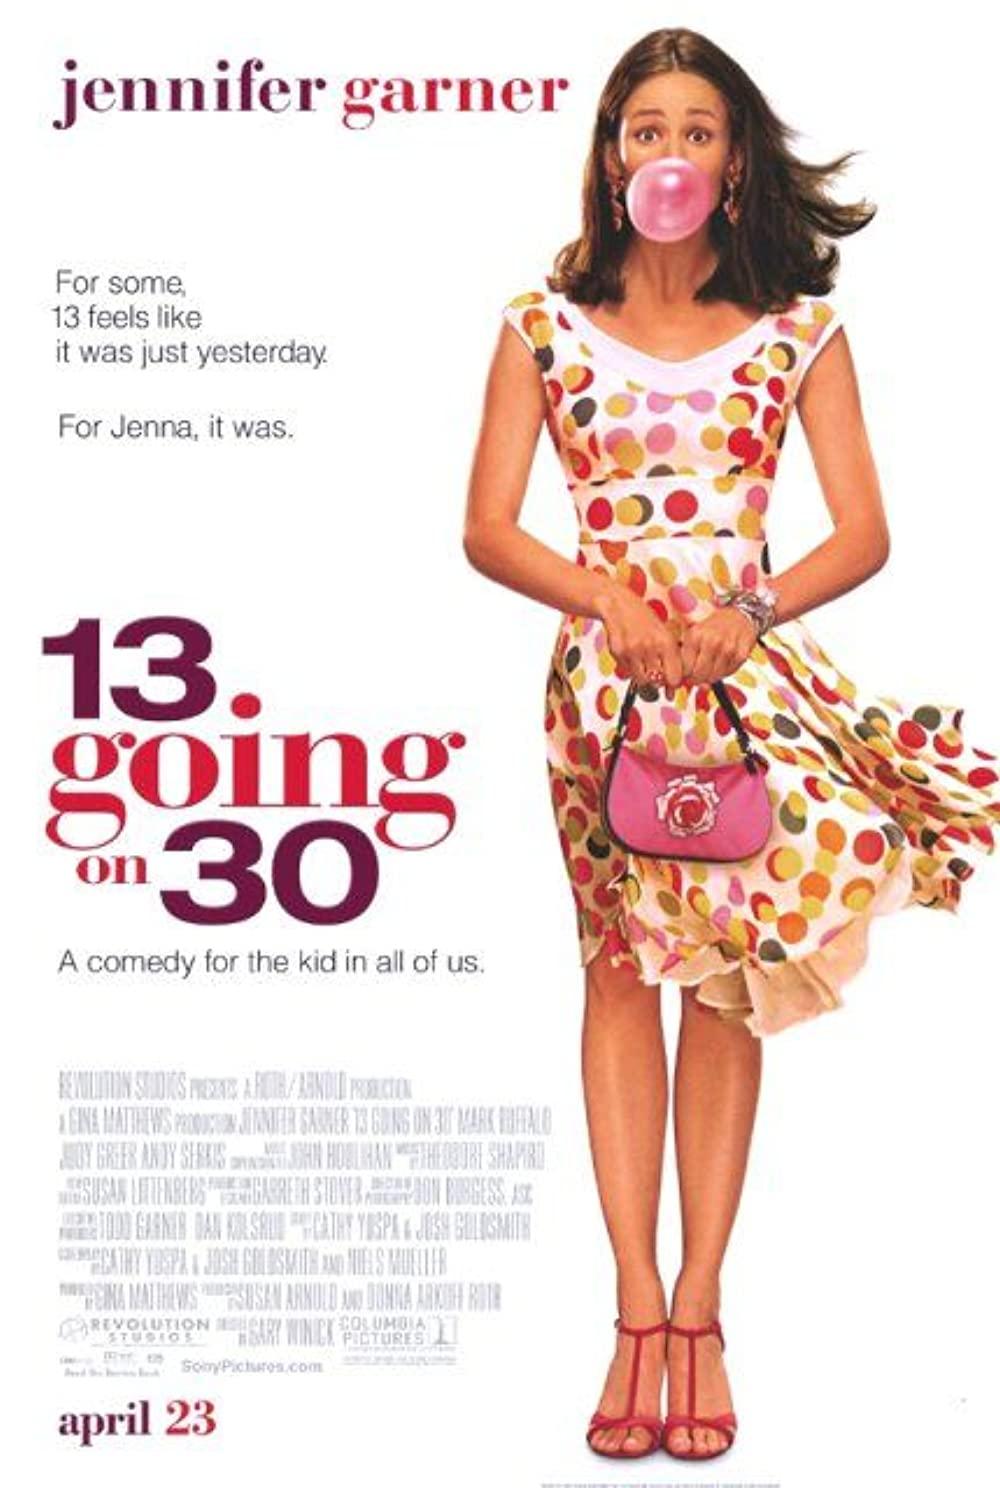 4.13 GOING ON 30 